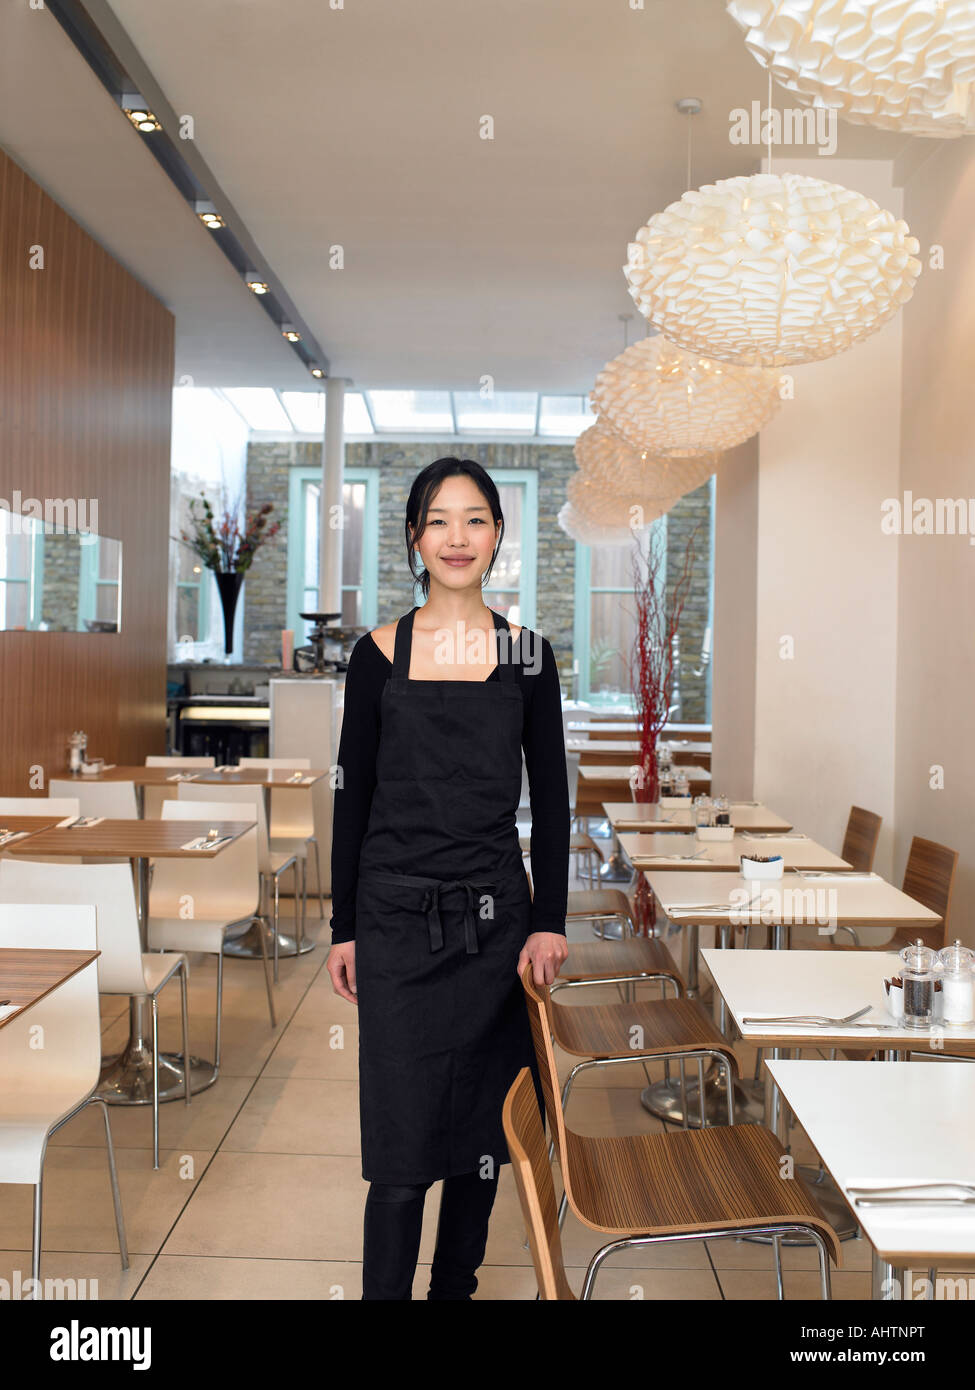 Young waitress standing in empty restaurant, smiling, portrait Stock Photo